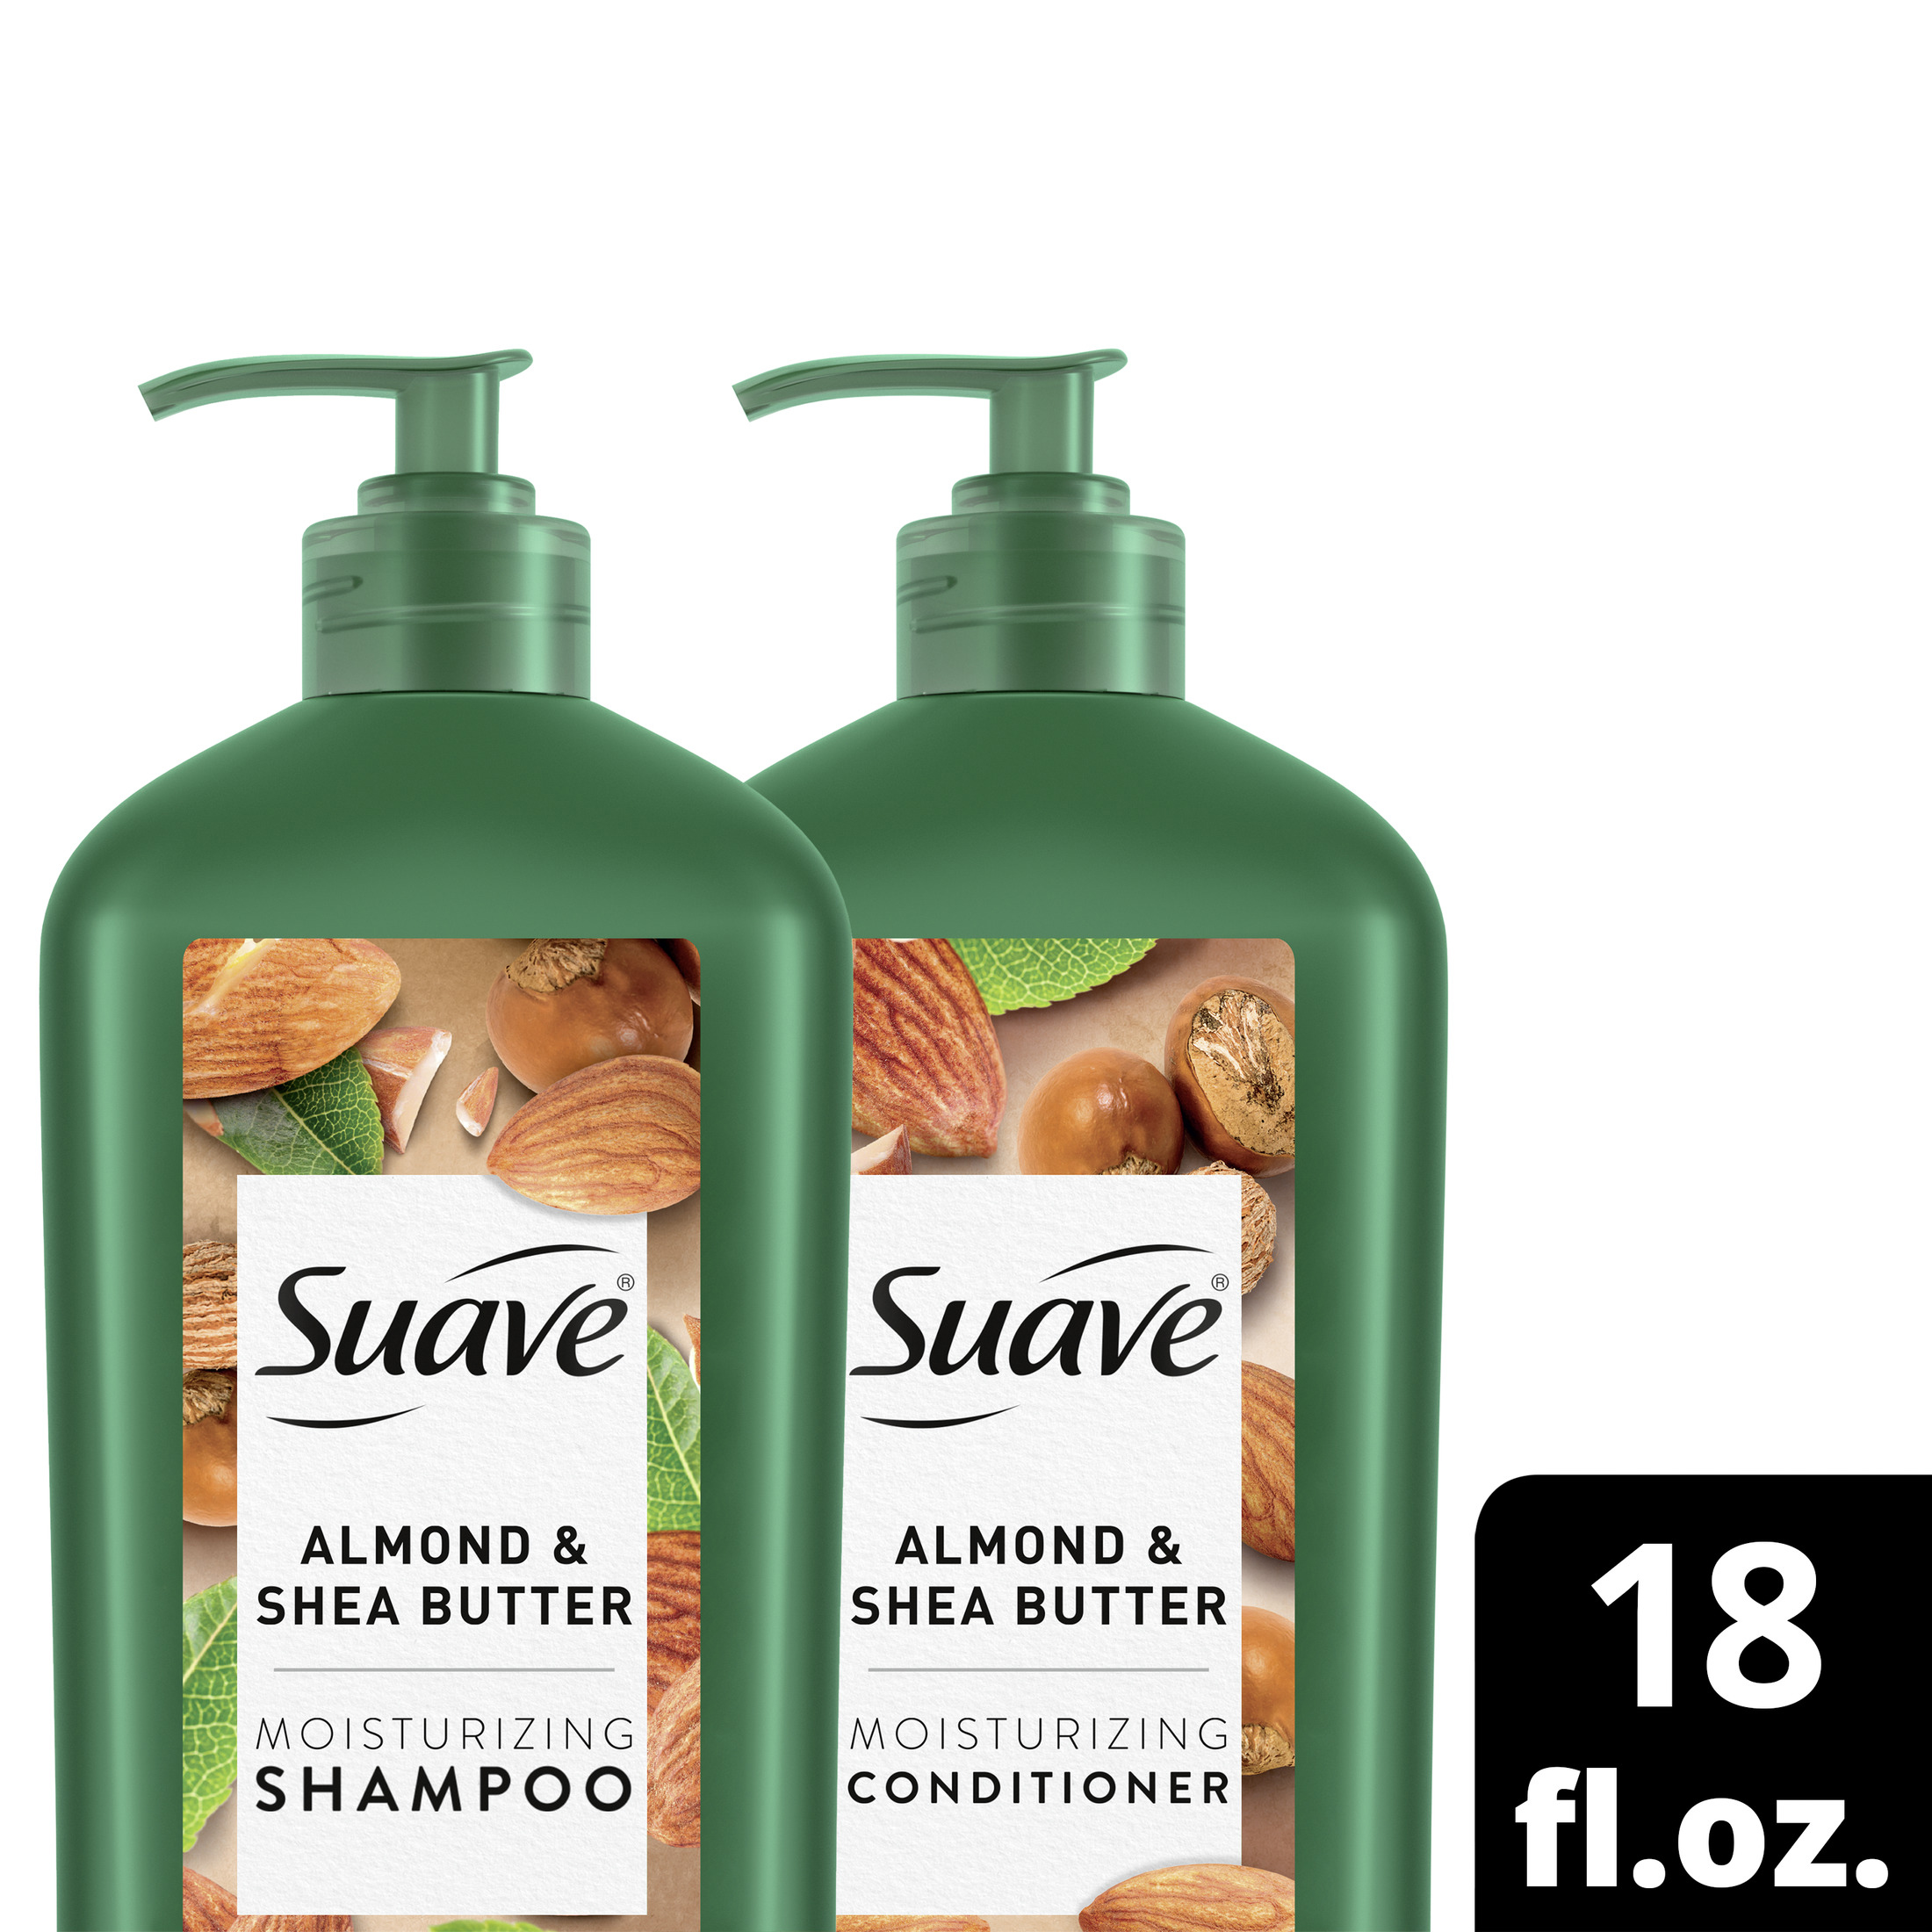 Suave Professionals Almond and Shea Butter Moisturizing Shampoo and Conditioner Paraben-free and Dye-free for Dry Hair 18 oz, 2 Count - image 1 of 13